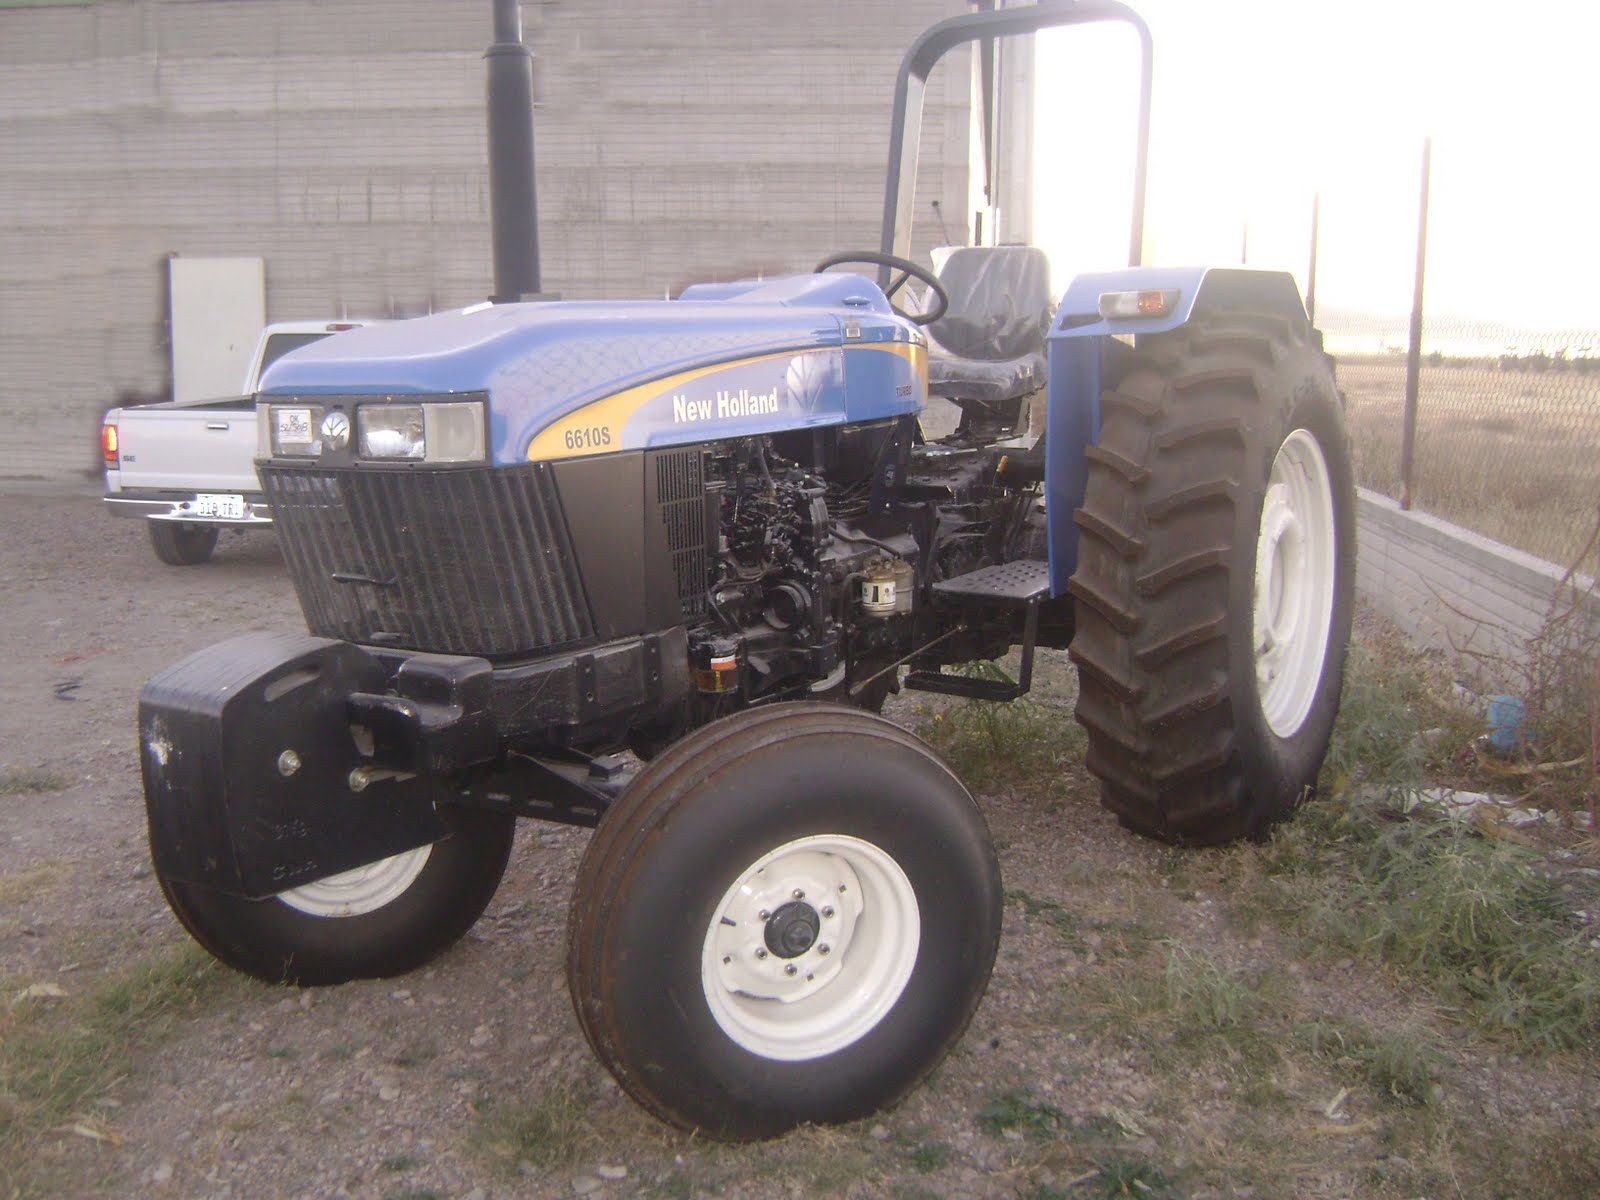 Ford new holland 6610s tractor #1